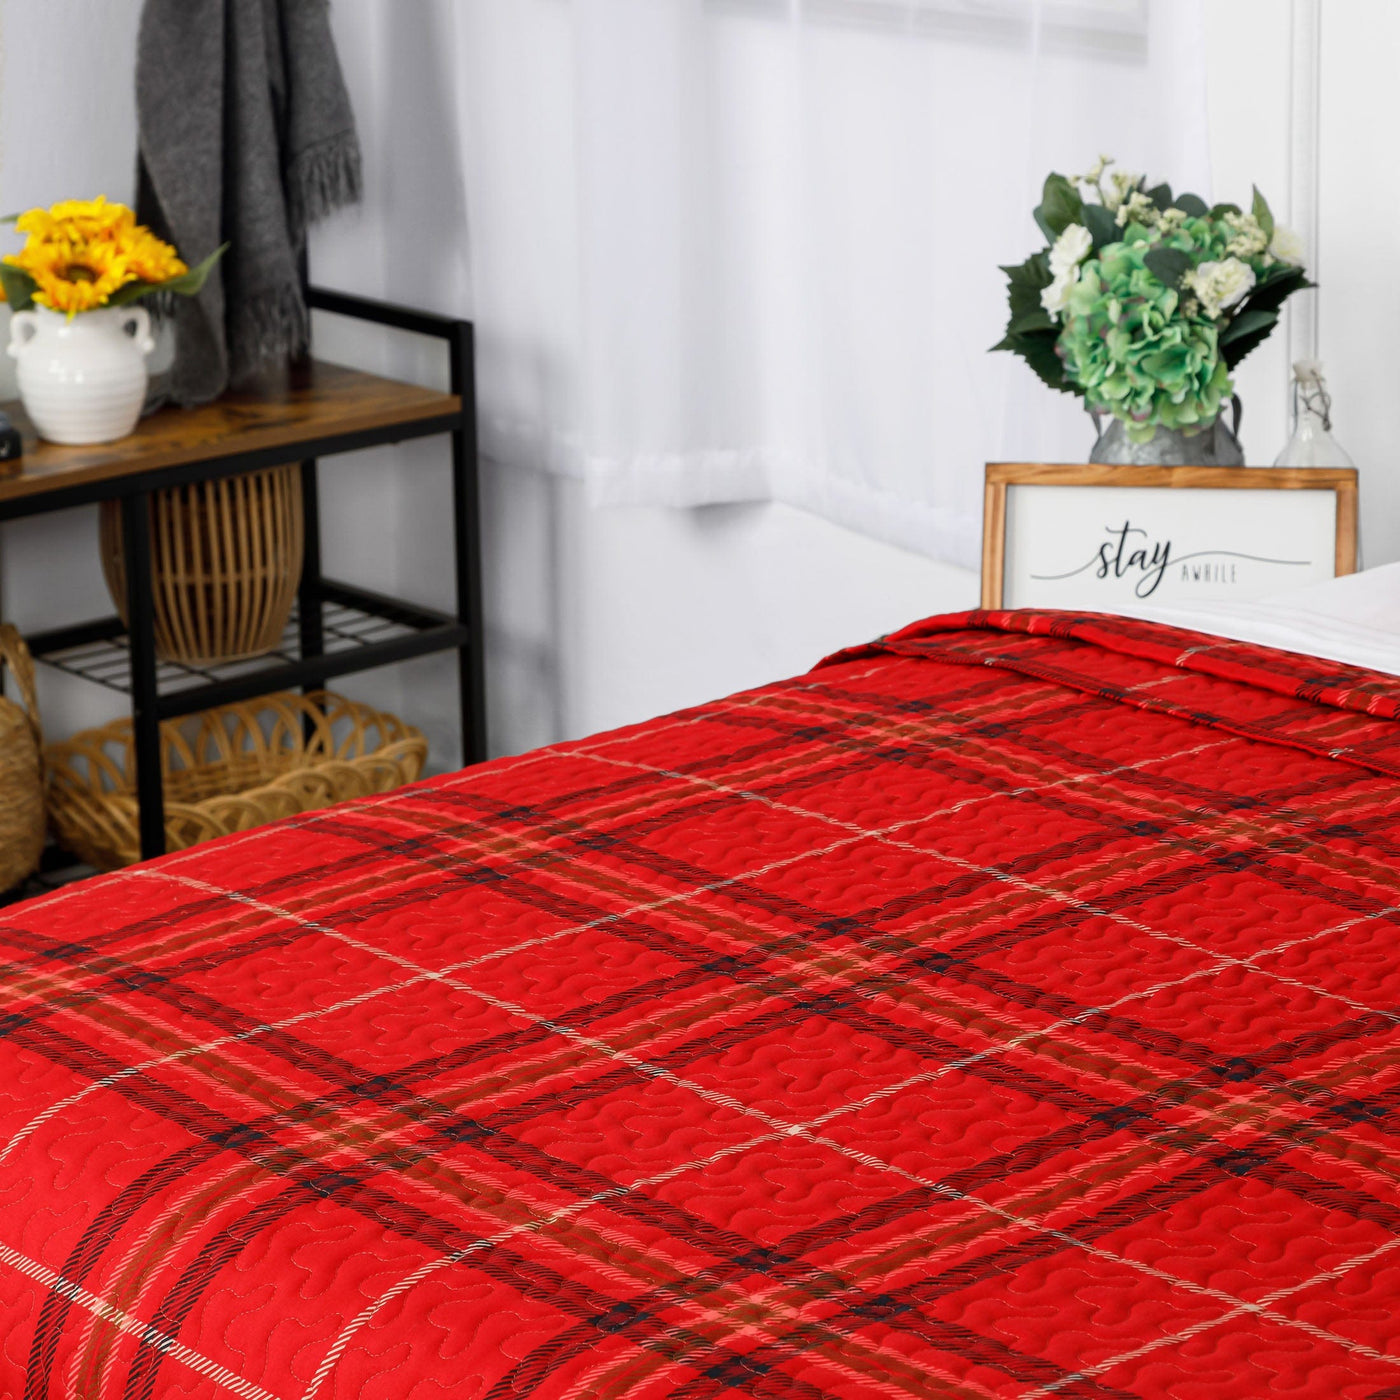 Side View of Vilano Plaid Quilt Set in Red#color_plaid-red